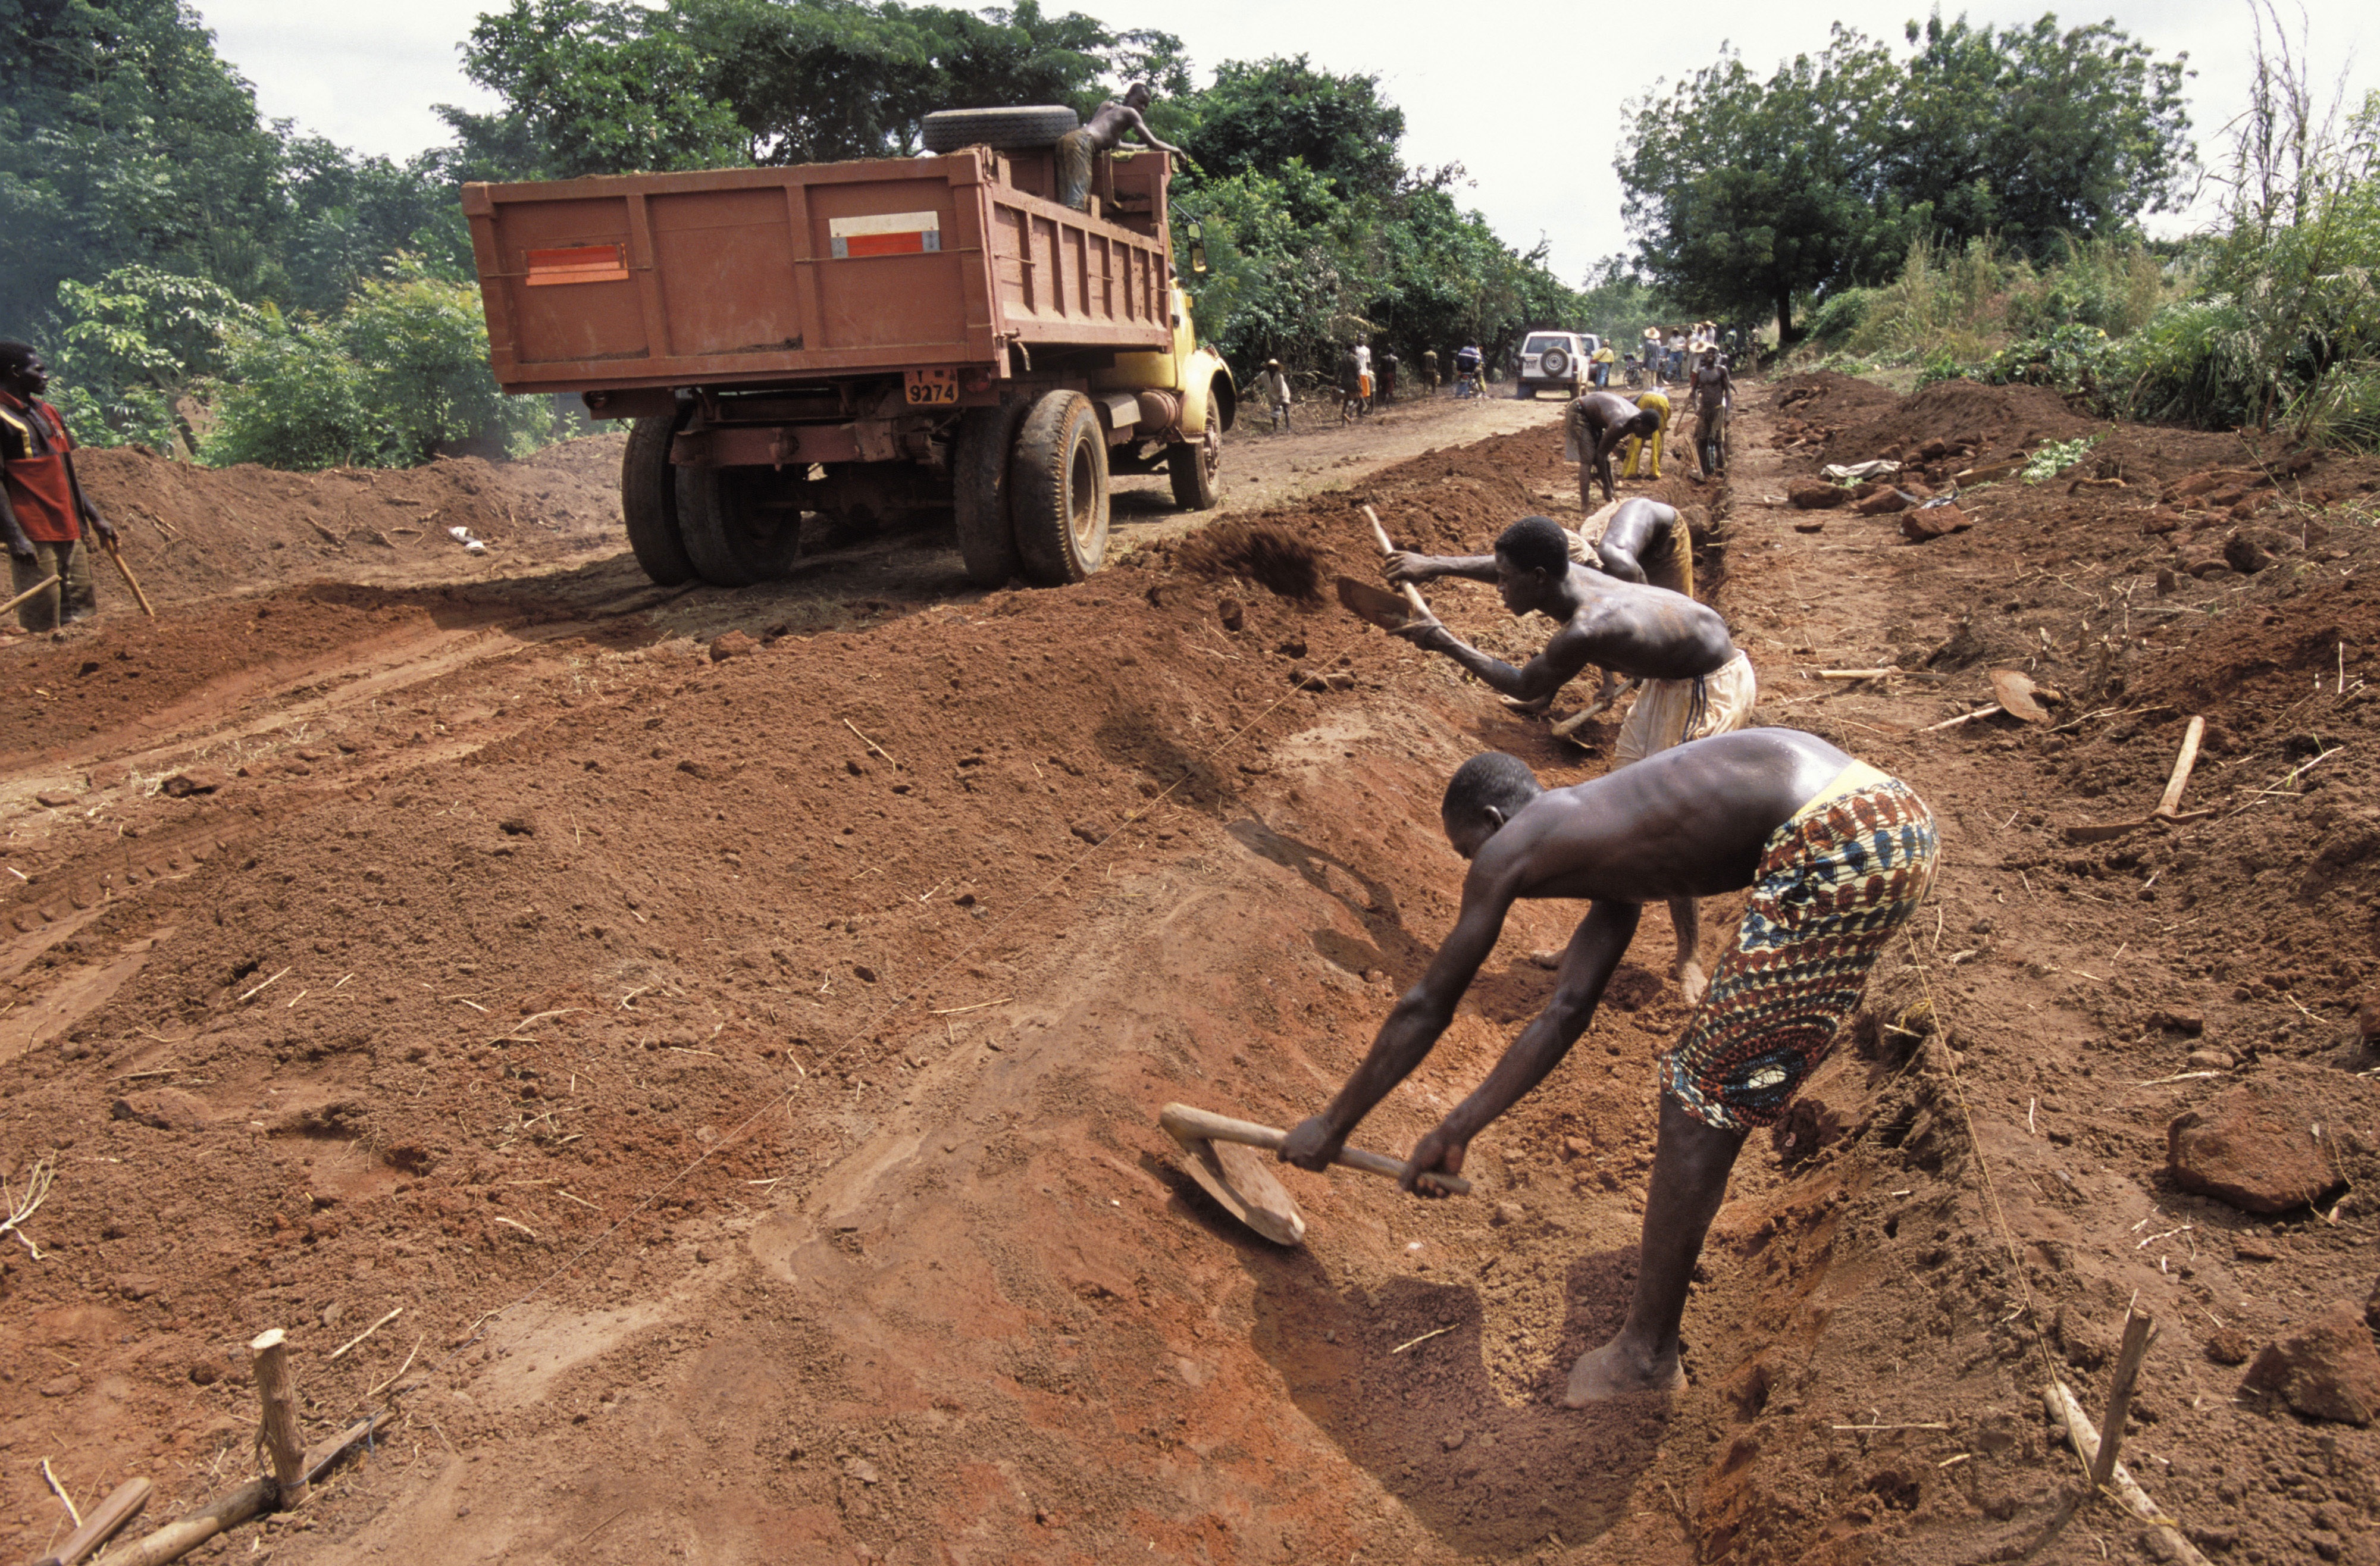 “Where mayor and council are up to their jobs, the rural transport infrastructure tends to be in  a rather good shape”: building a feeder road to connect  a village in 2006.